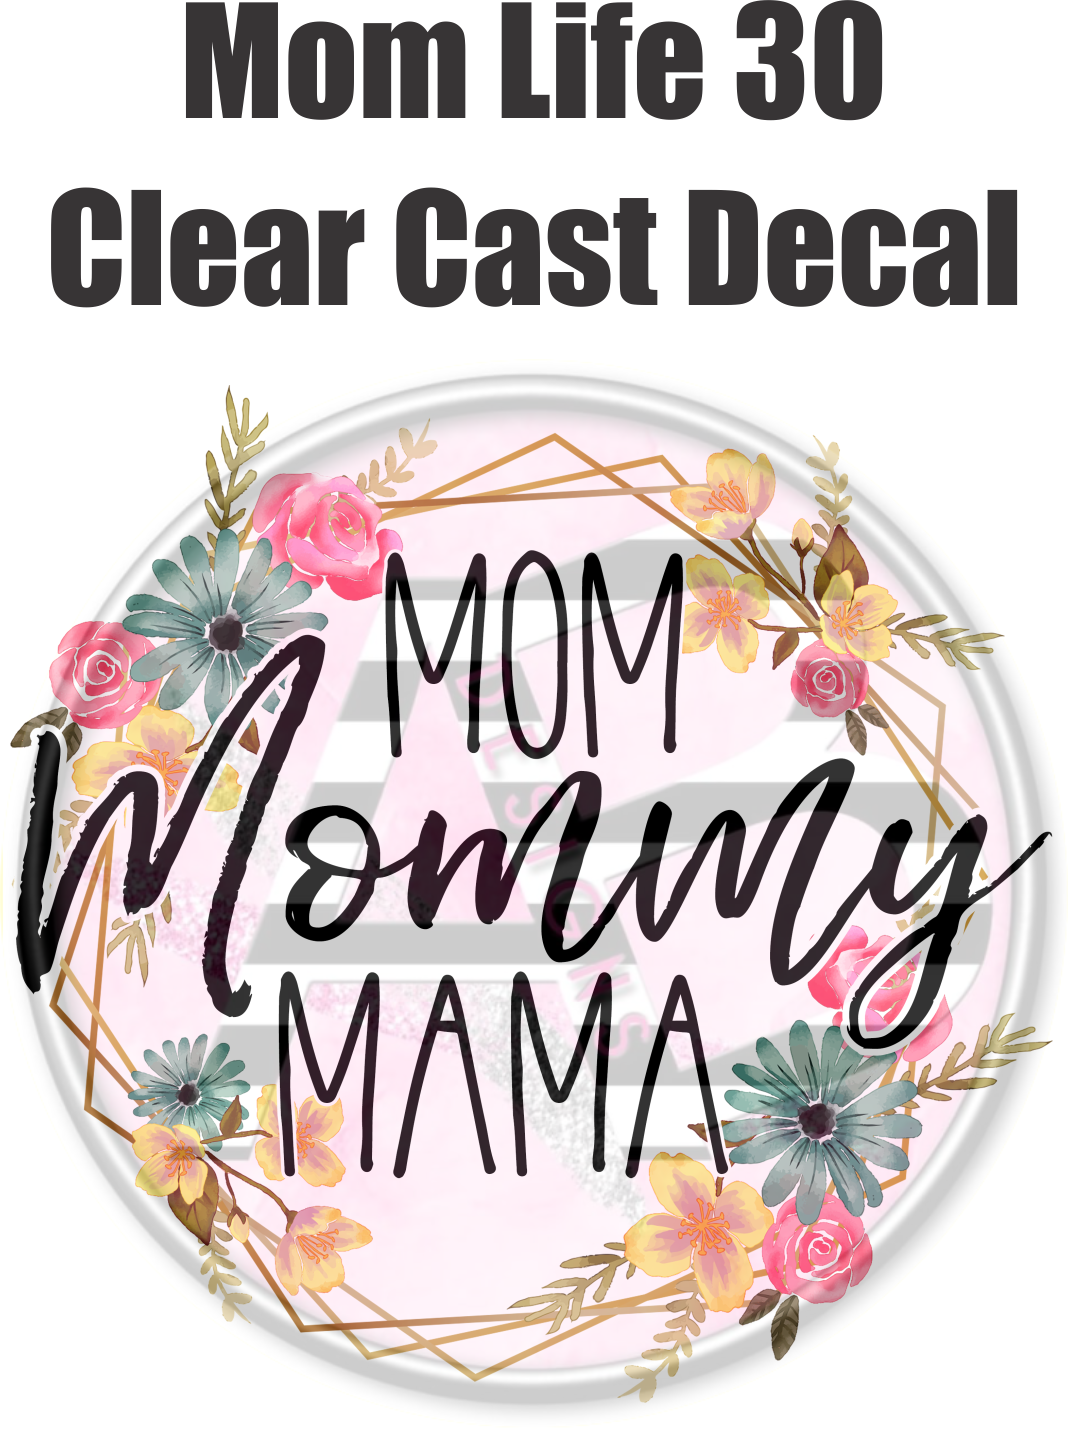 Mom Life 30 - Clear Cast Decal